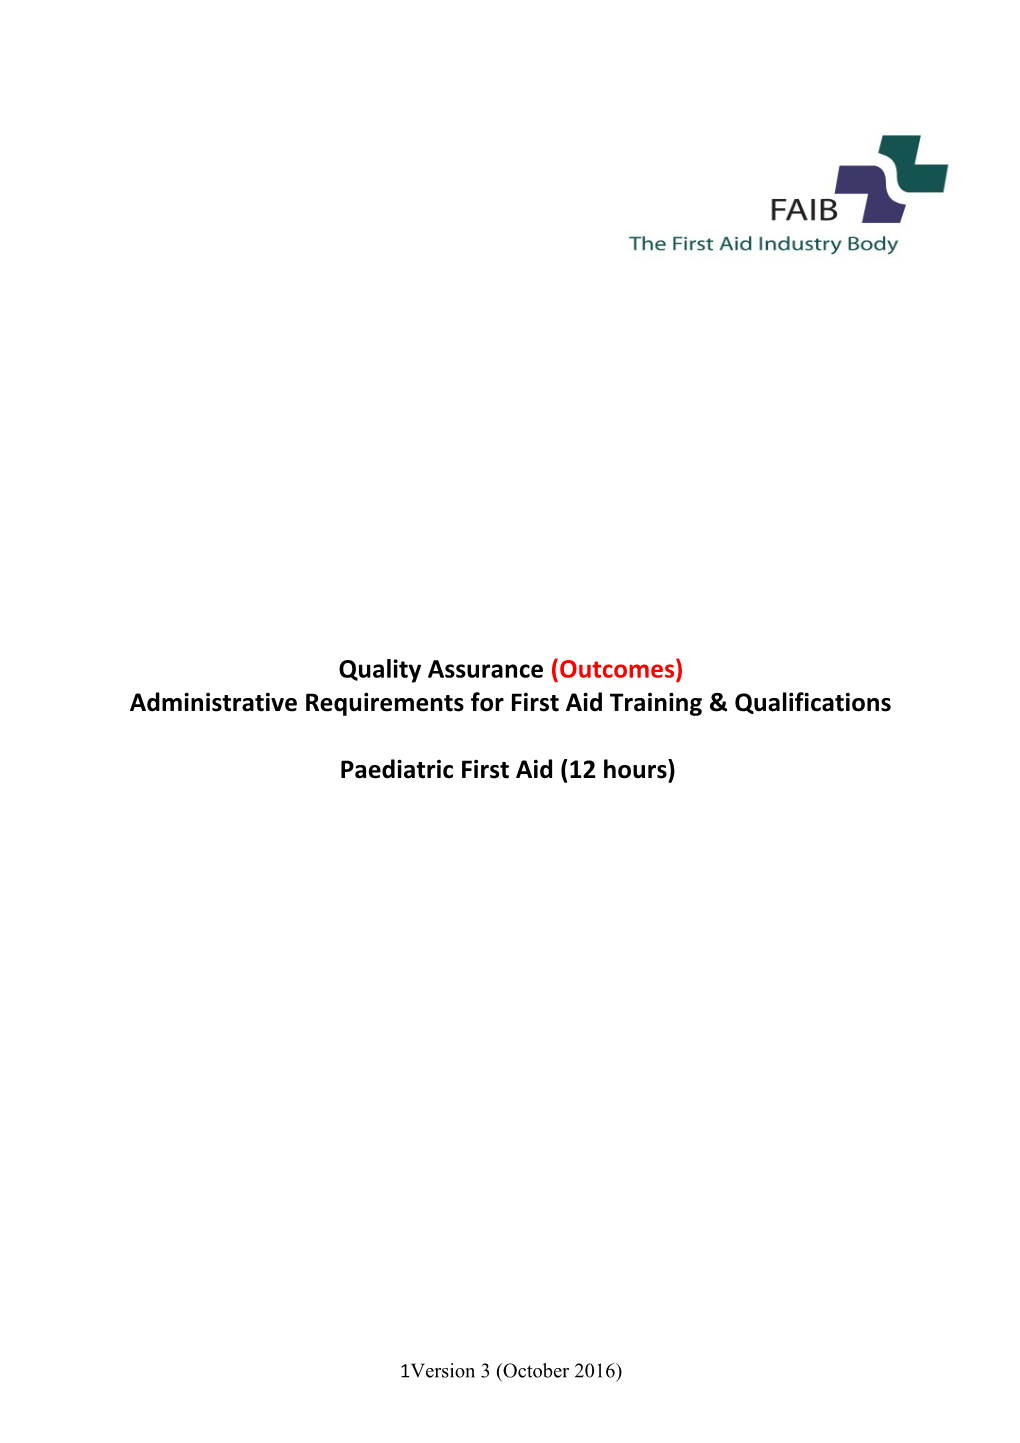 Administrative Requirements for First Aid Training & Qualifications